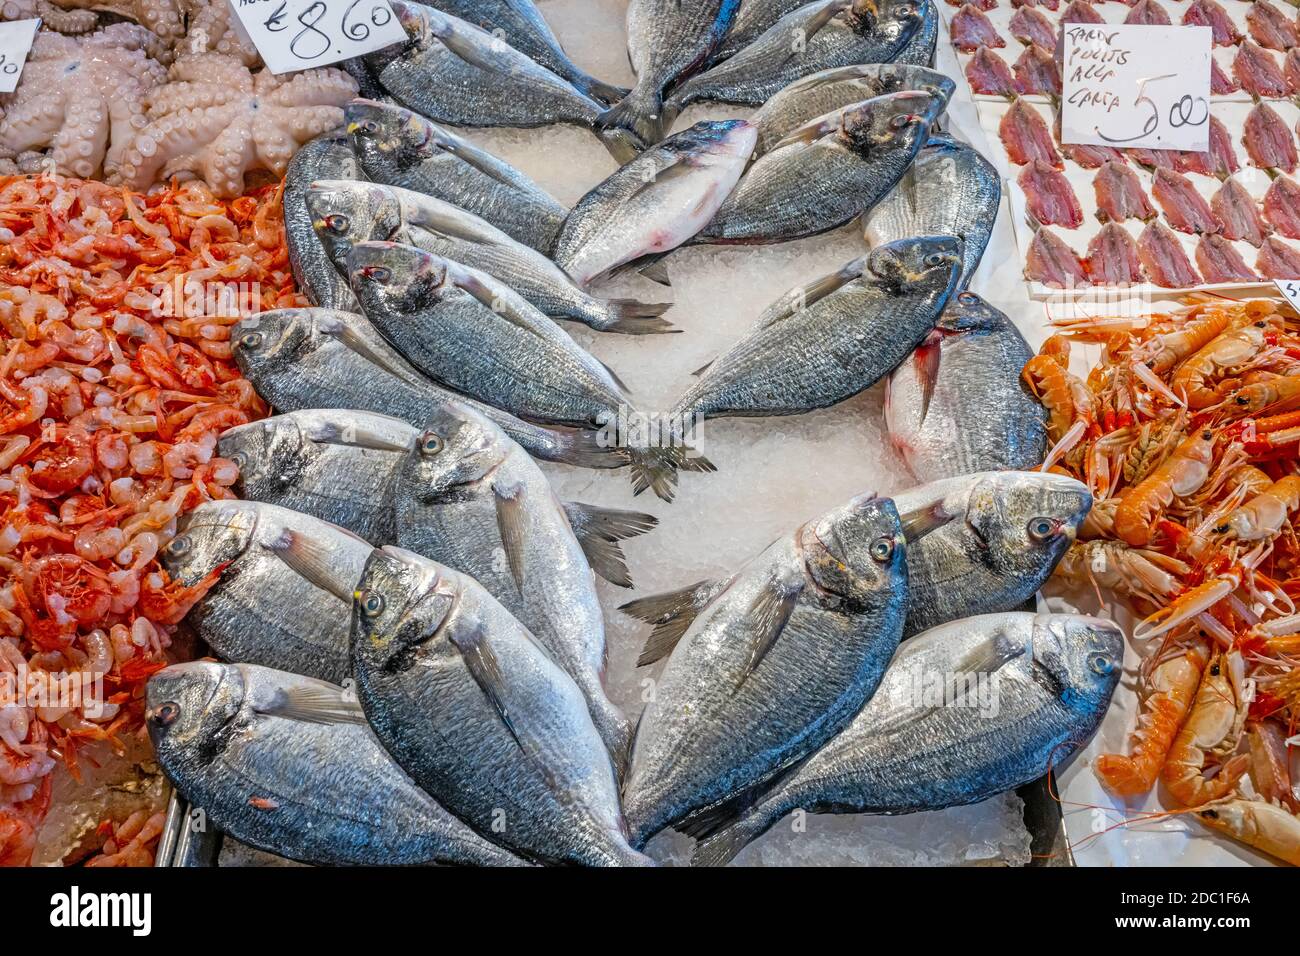 Fish and seafood for sale at a market in Venice, Italy Stock Photo